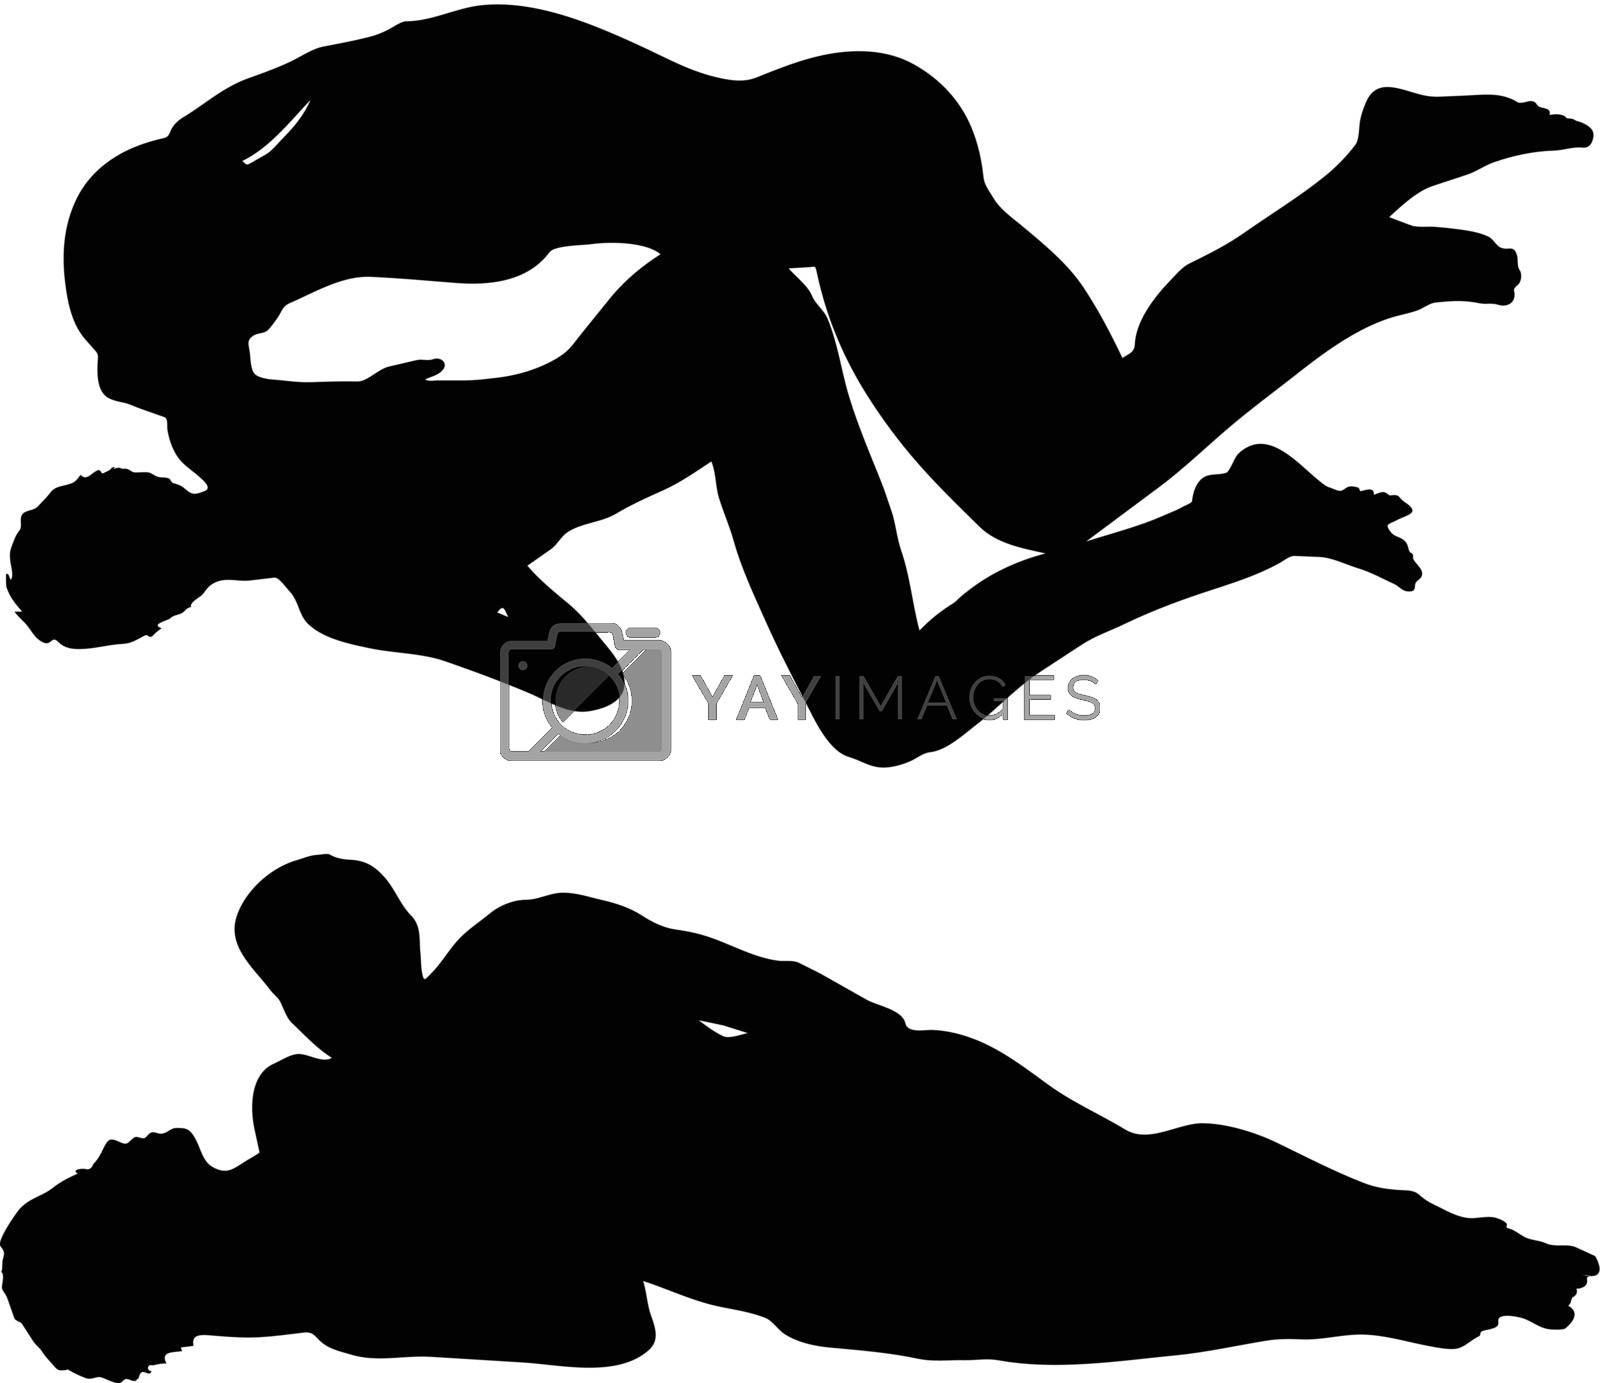 YAY Images - silhouette with kama sutra positions on white background by Is...